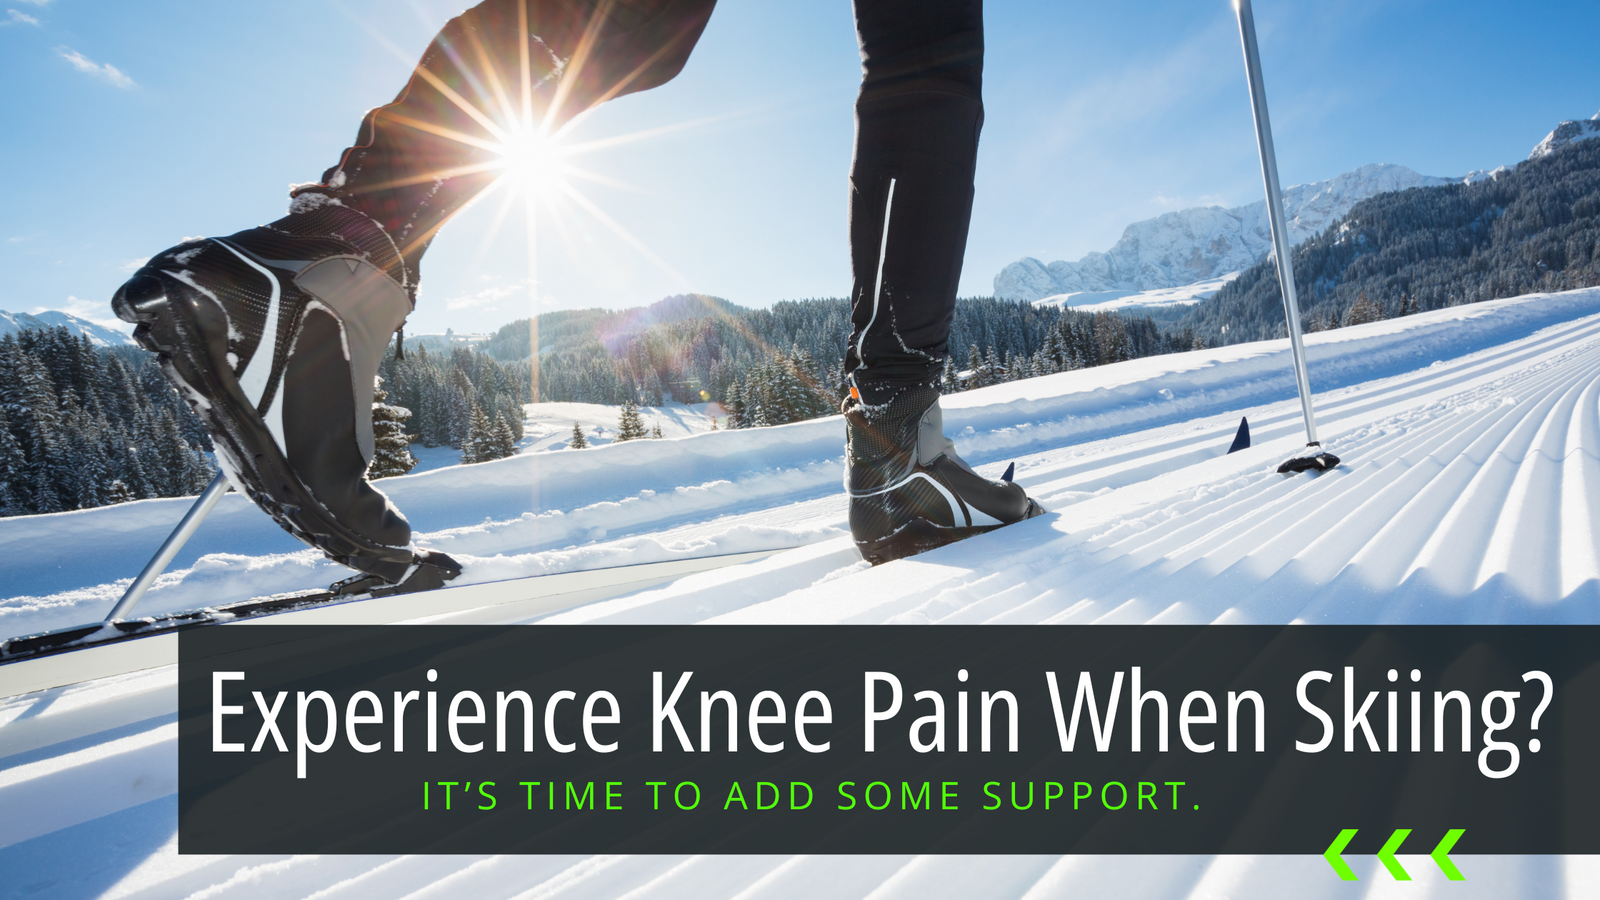 Bracelayer Blogs - Header for Experiencing Knee Pain When Skiing? It's time to add support. It shows the title and subtitle while a person skis in the background.